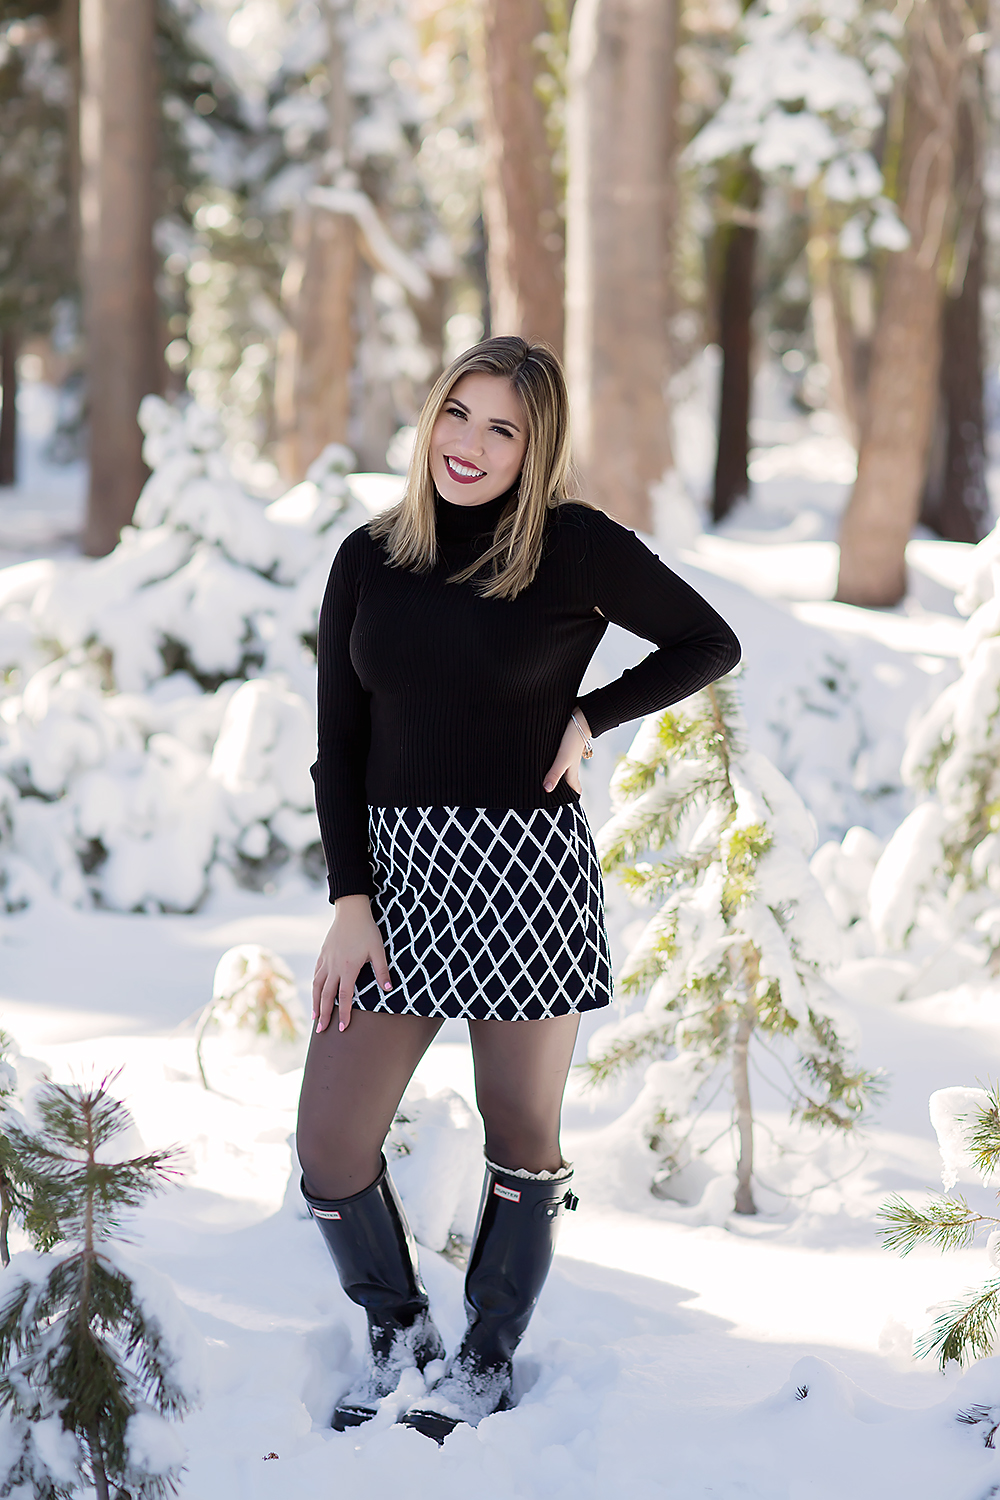 Senior session in snow in Tahoe, California by Colleen Sanders Photography hunter boots.